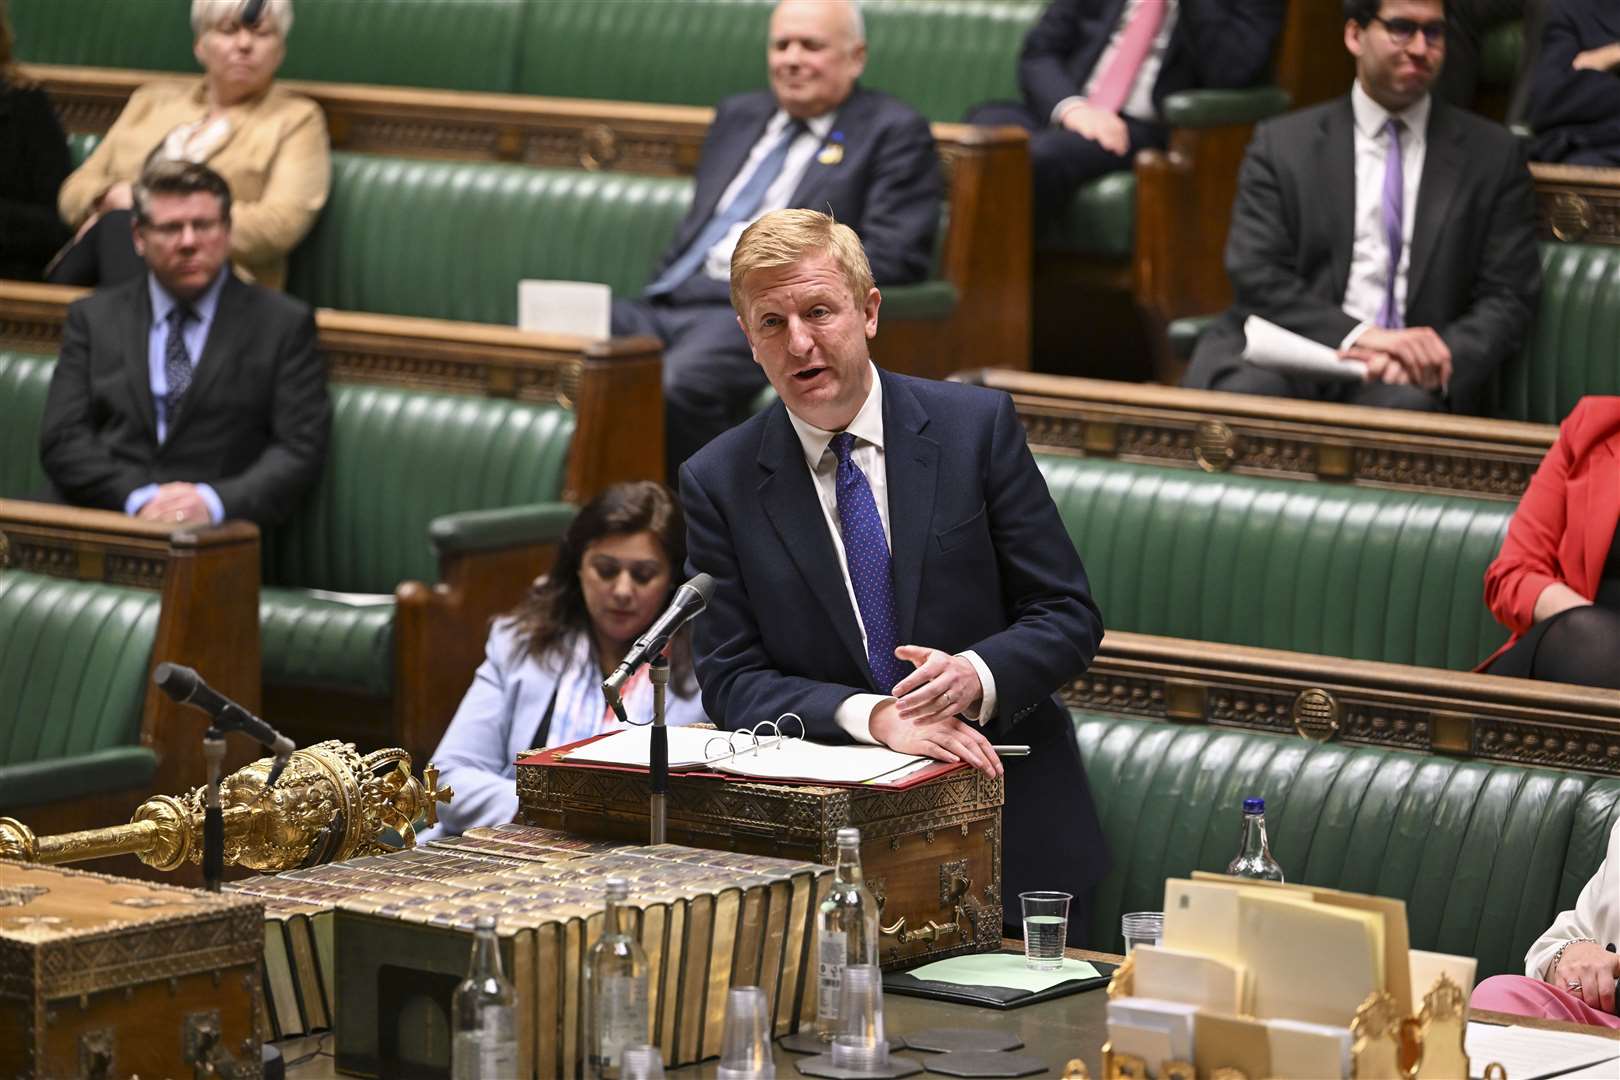 Oliver Dowden making a statement in the Commons that Beijing is behind a wave of state-backed interference (UK Parliament/Andy Bailey)